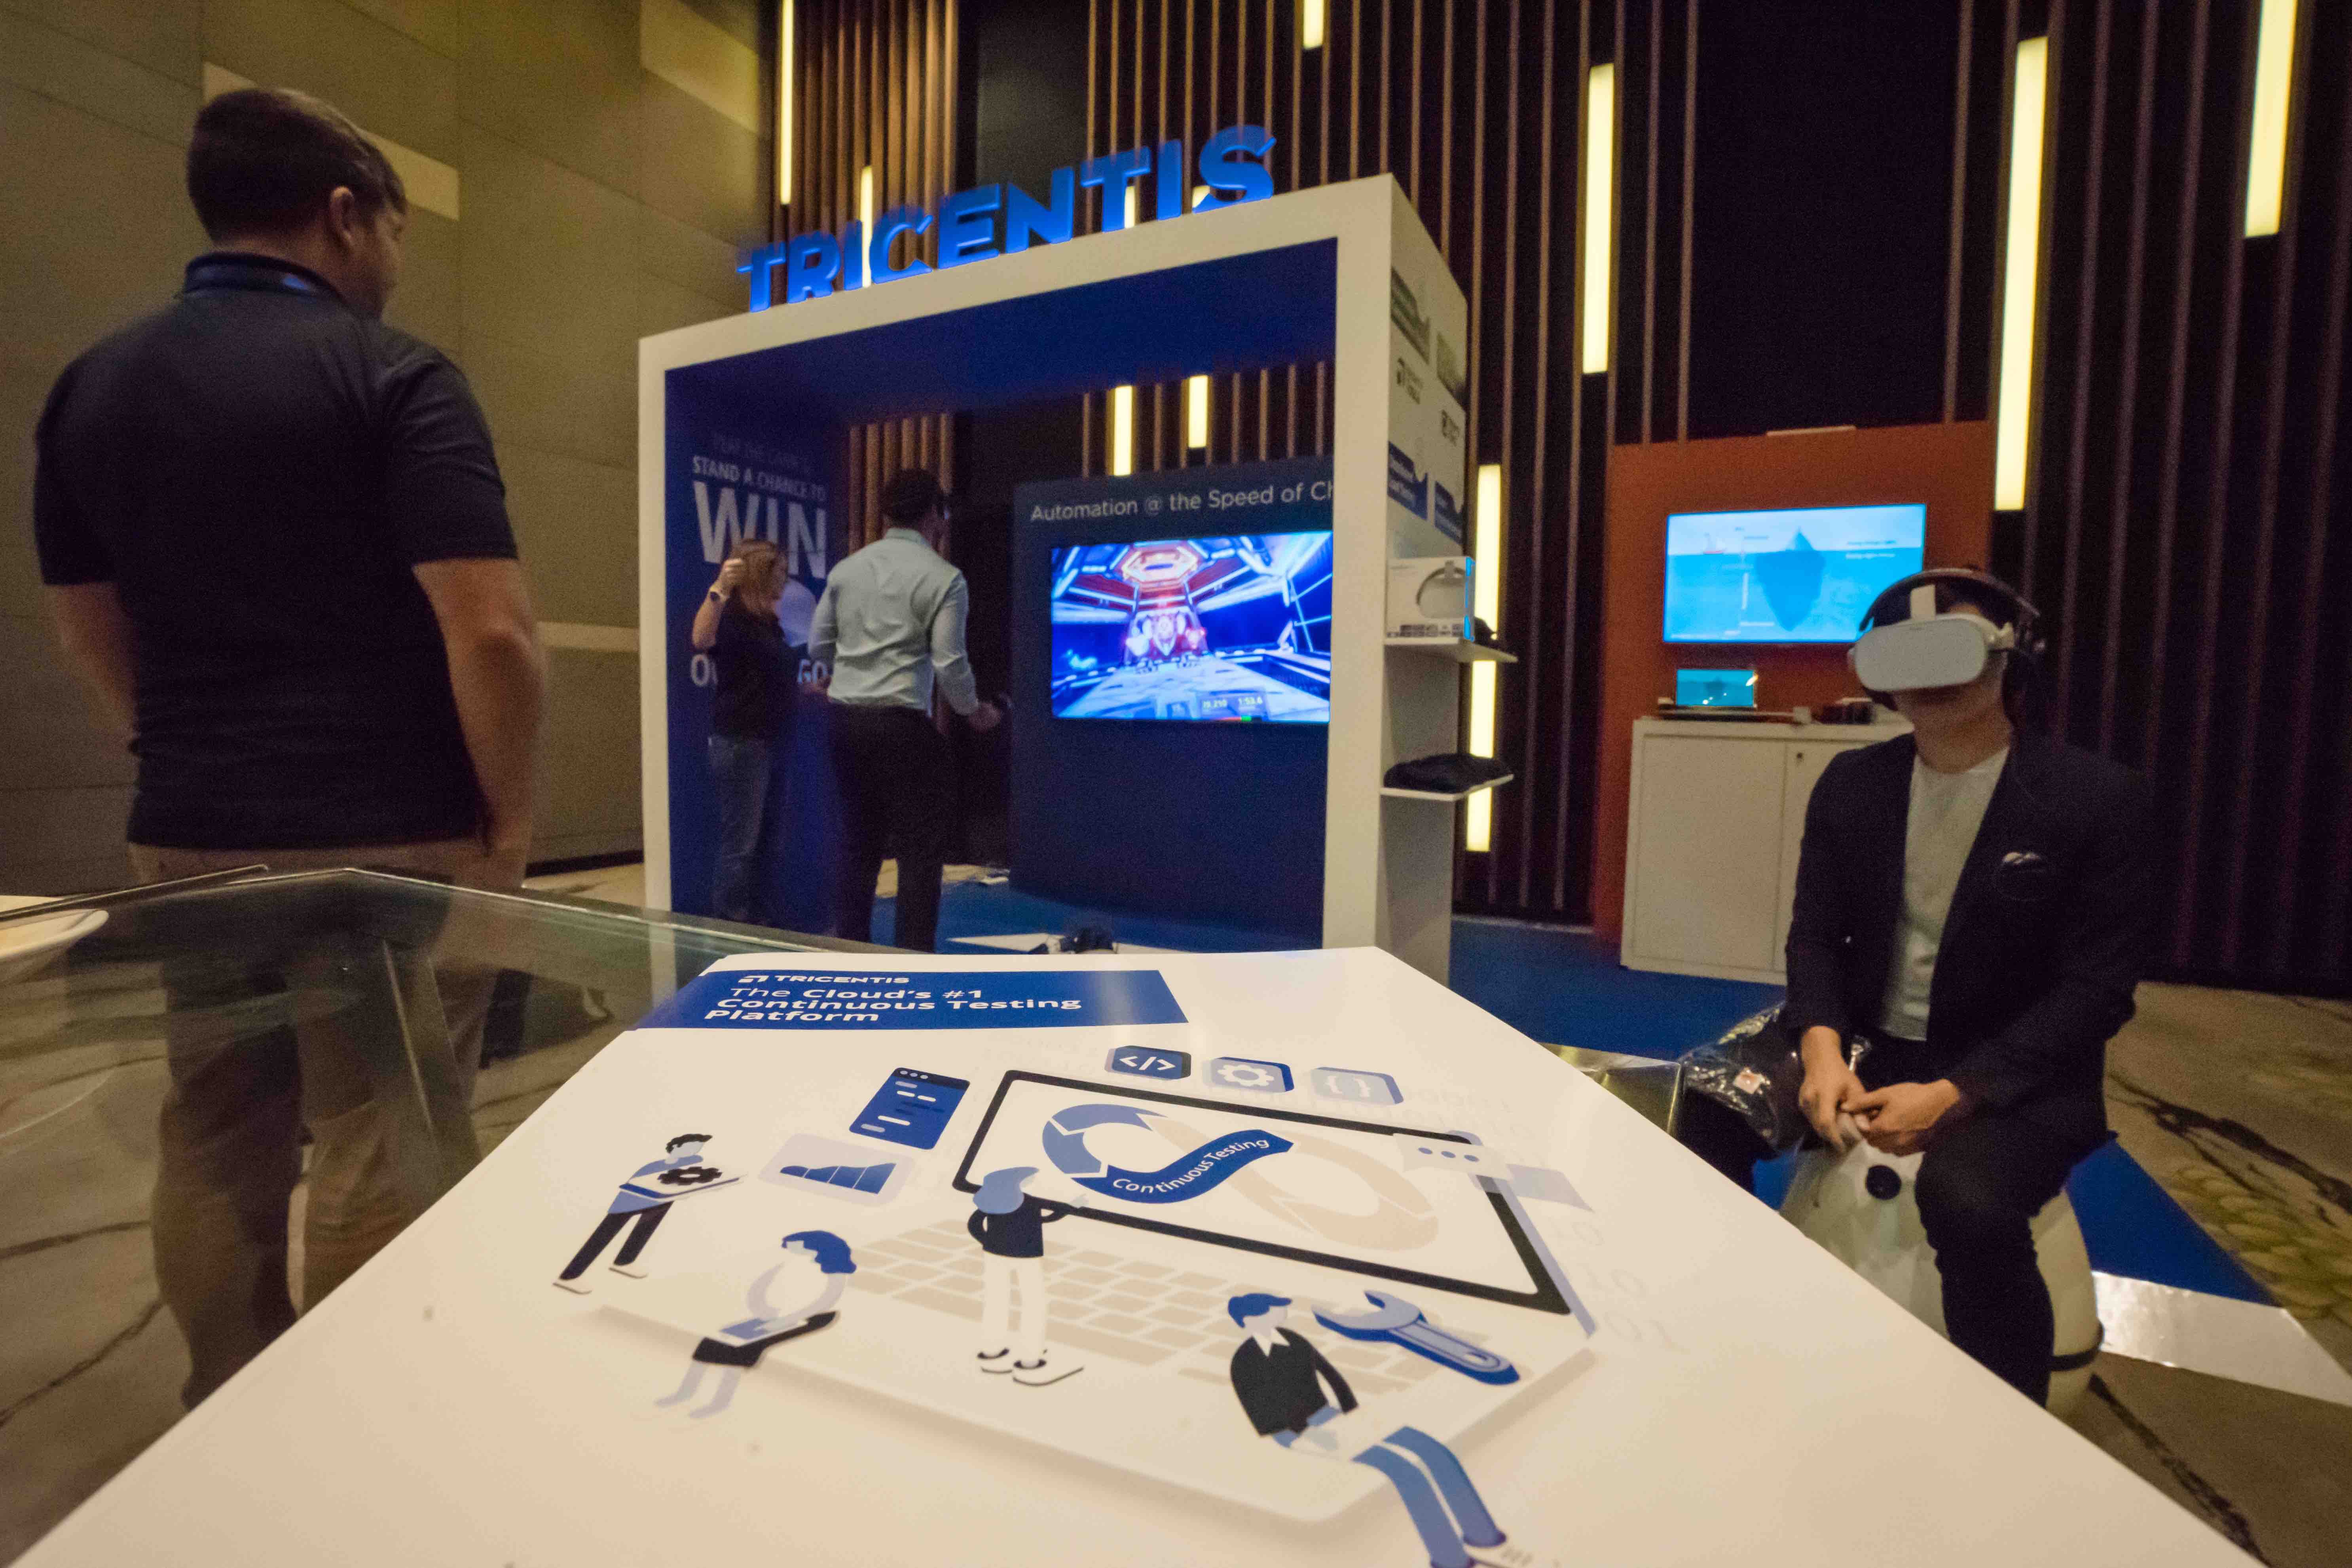 Tricentis exhibiting its solutions.